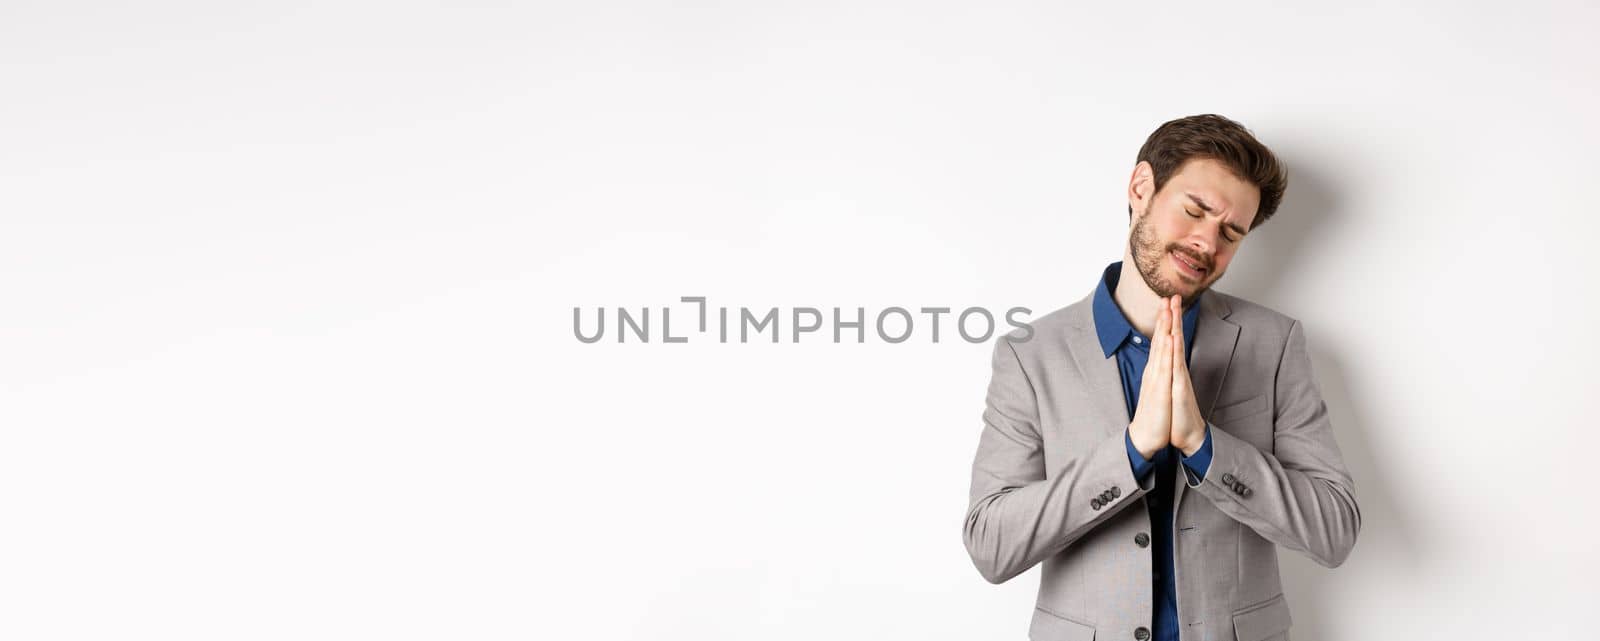 Pleading businessman begging for help, holding hands in pray and asking for favour, need something, say please, standing on white background.